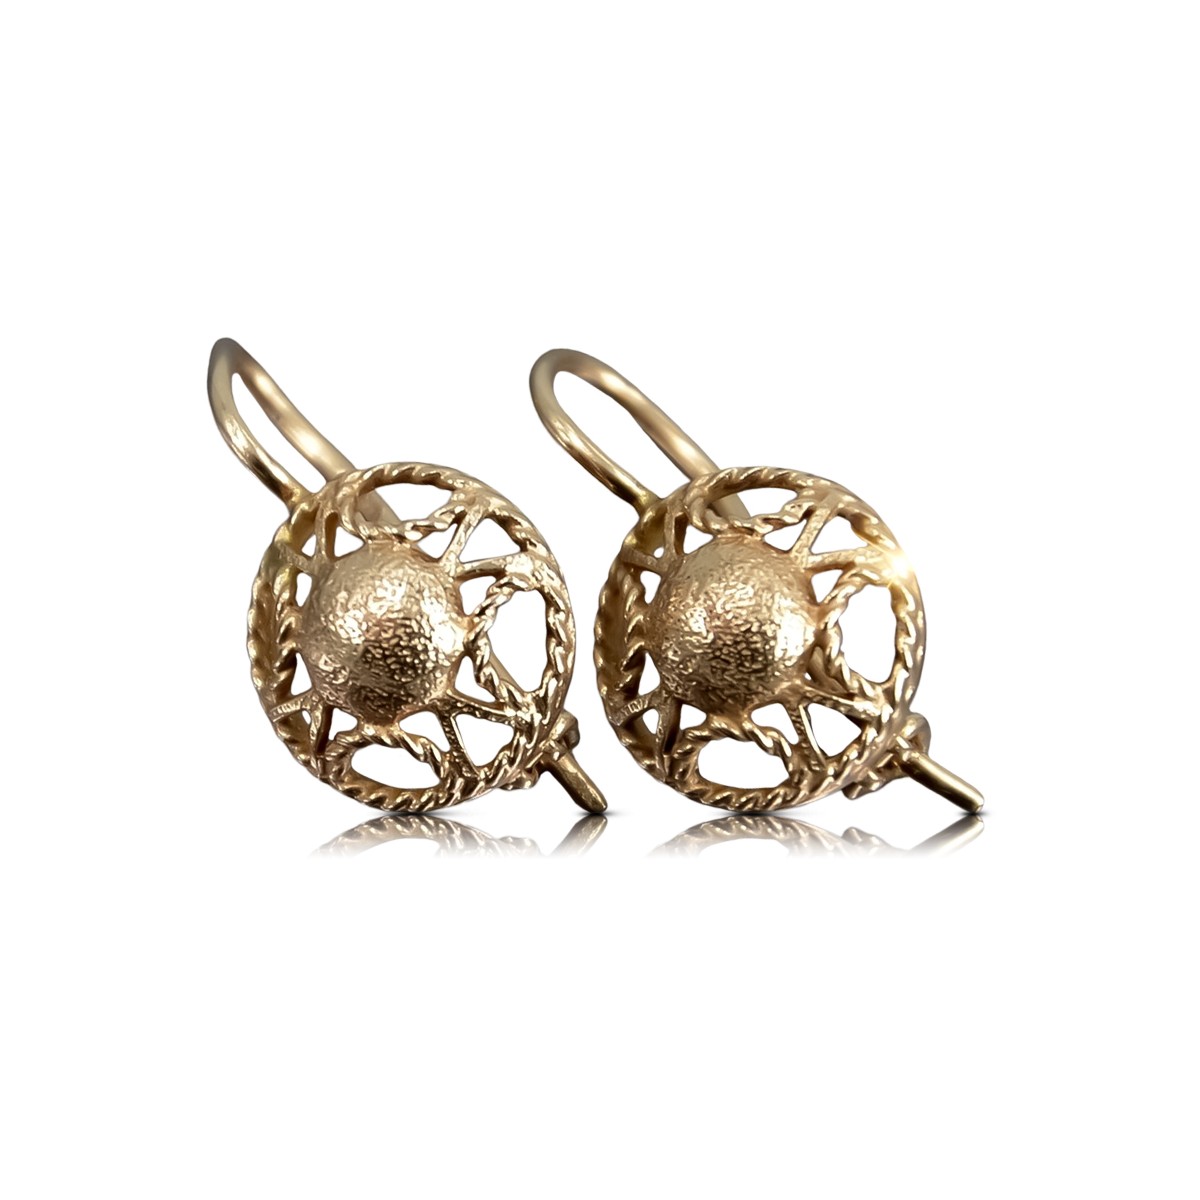 "Premium Vintage Inspired 14K Rose Gold Earrings without Stones" ven279